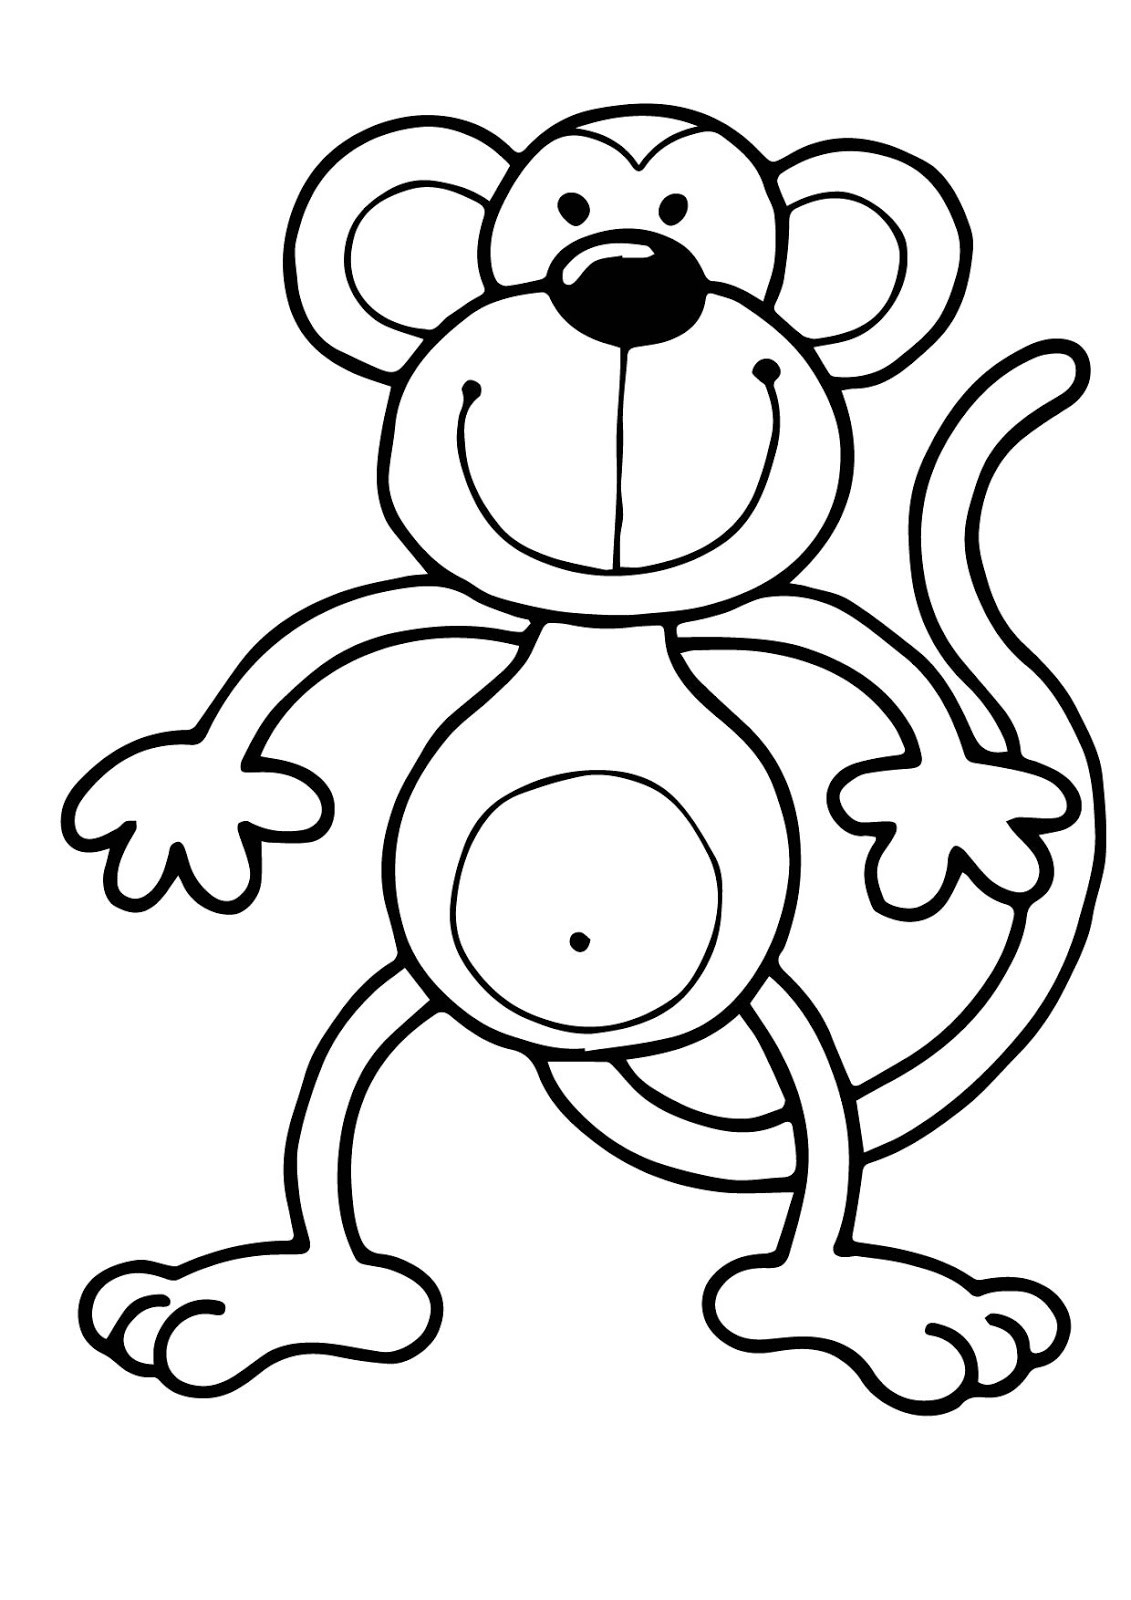 Coloring Book Pages For Toddlers
 Riscos graciosos Cute Drawings Riscos de macaquinhos